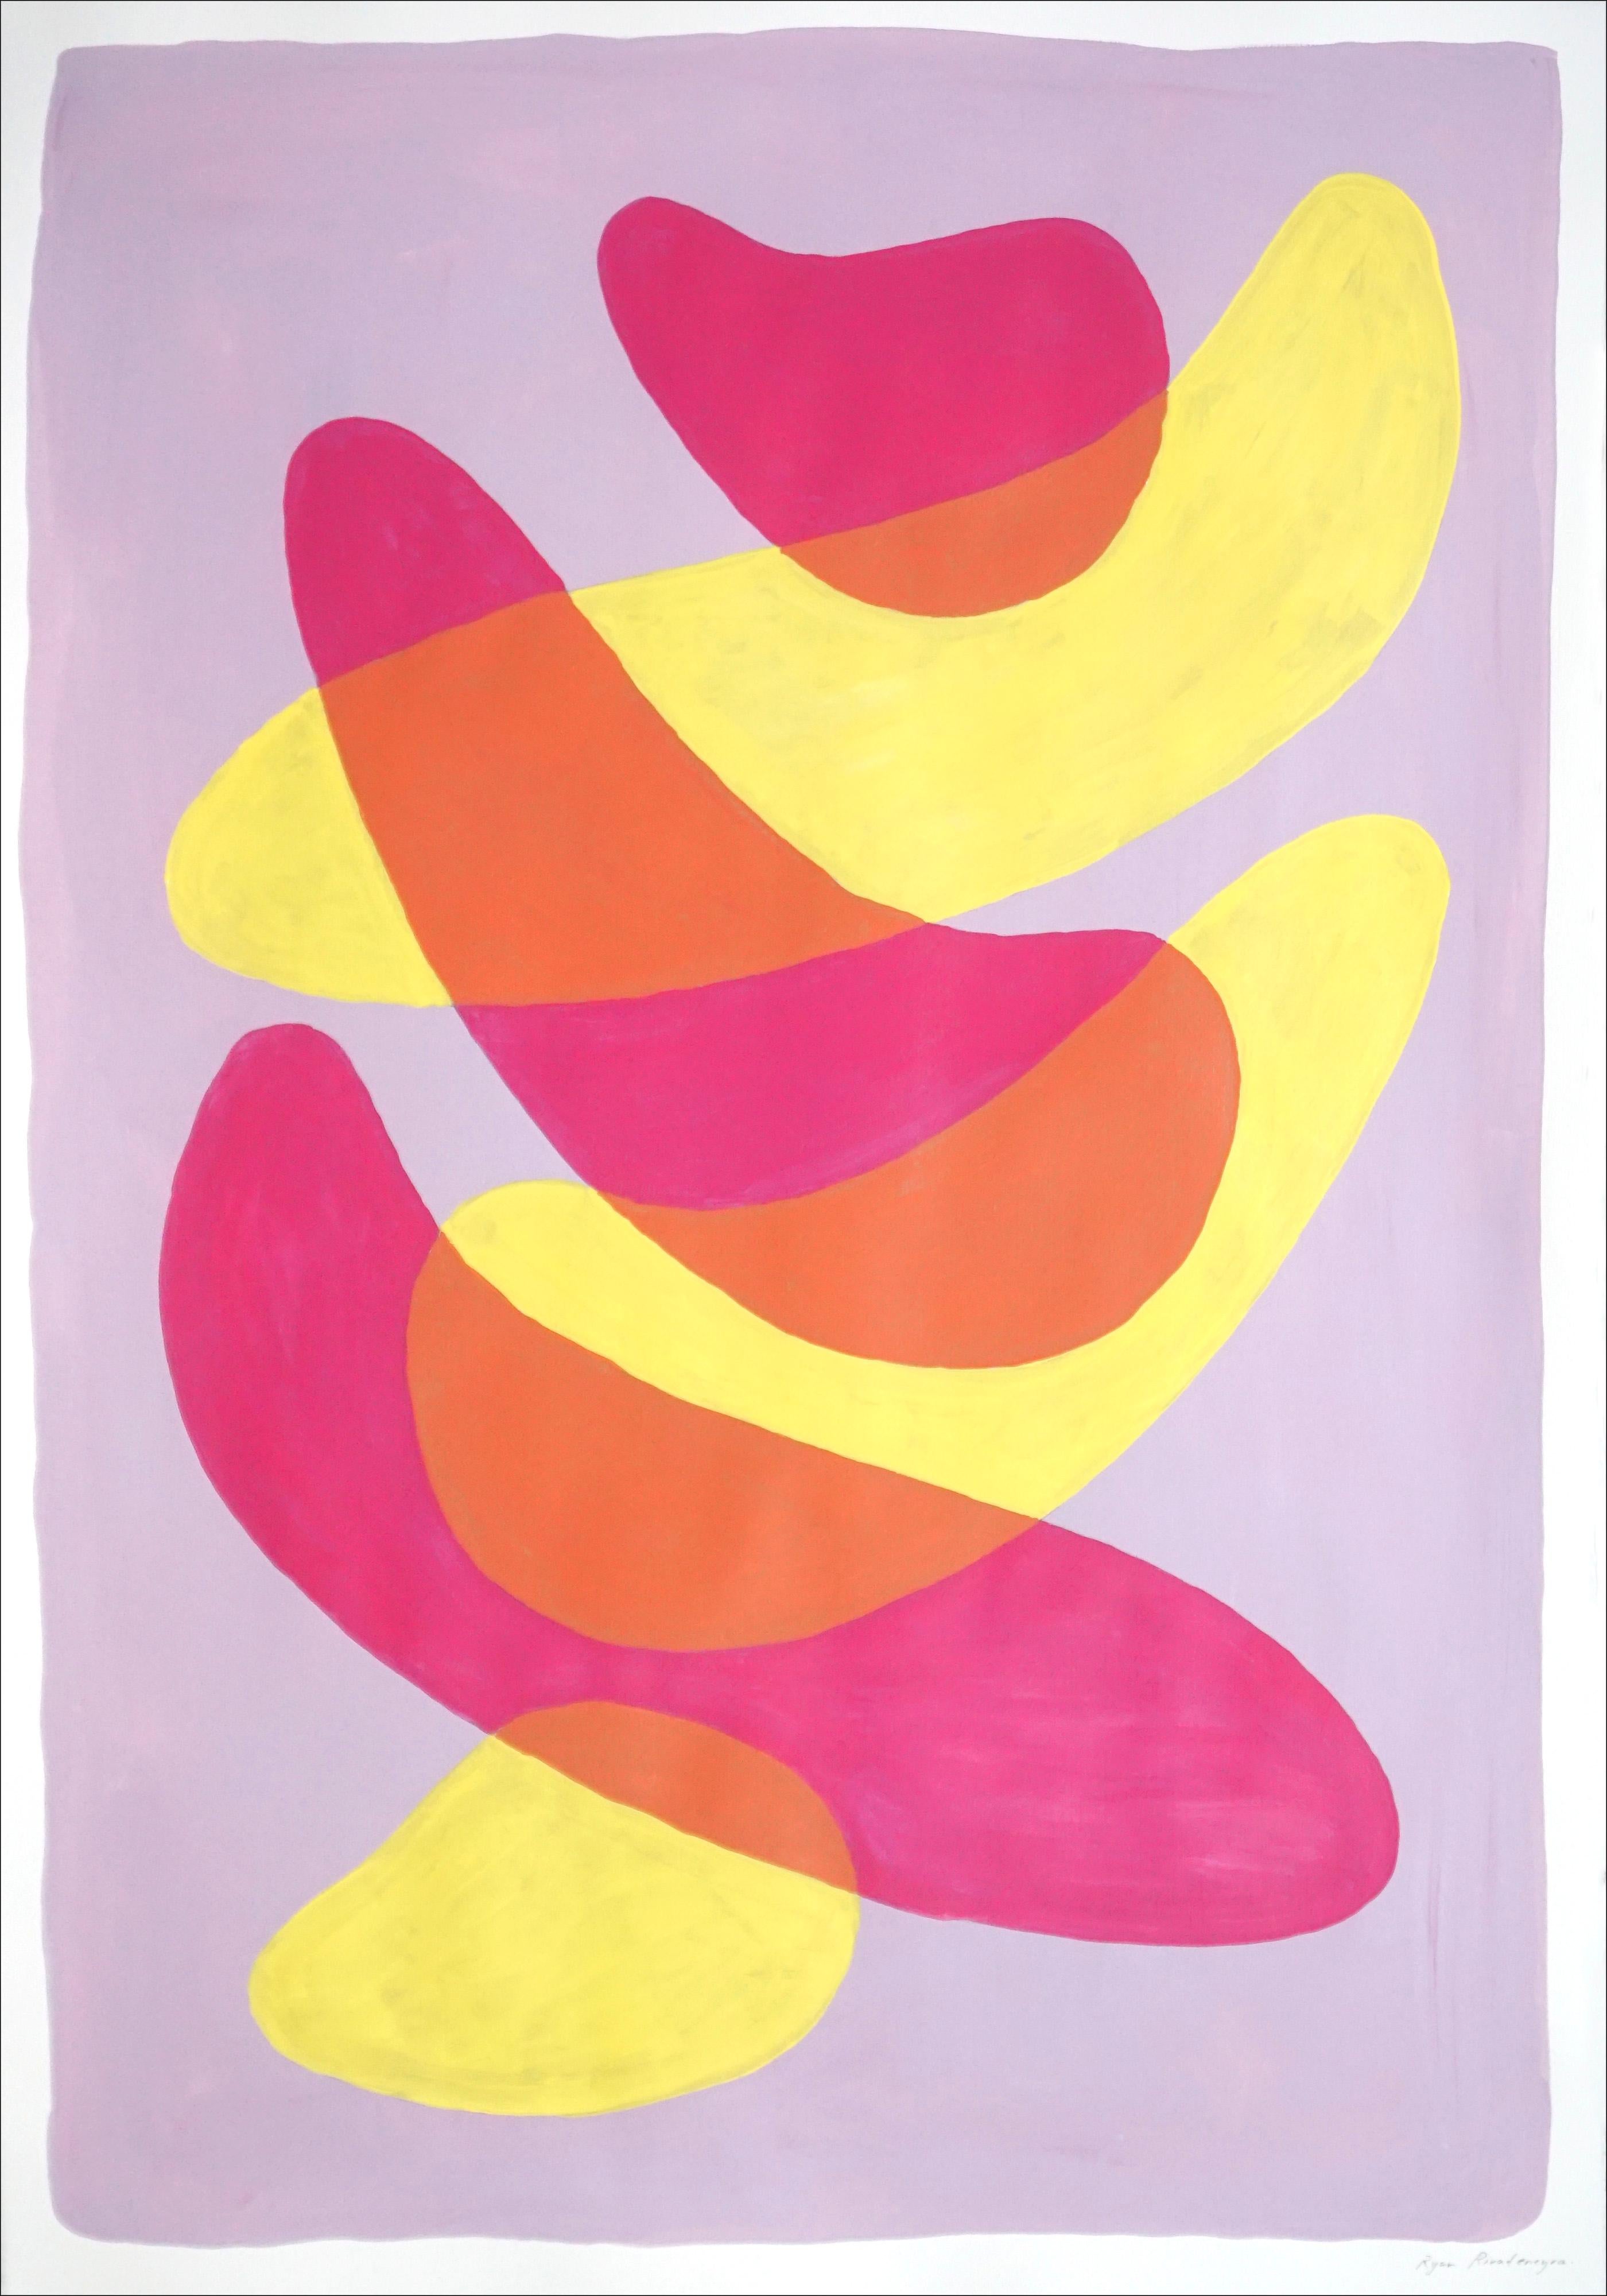 Overlapping Strokes on Mauve, Vivid Lime and Pink Minimal Gestures Painting, 